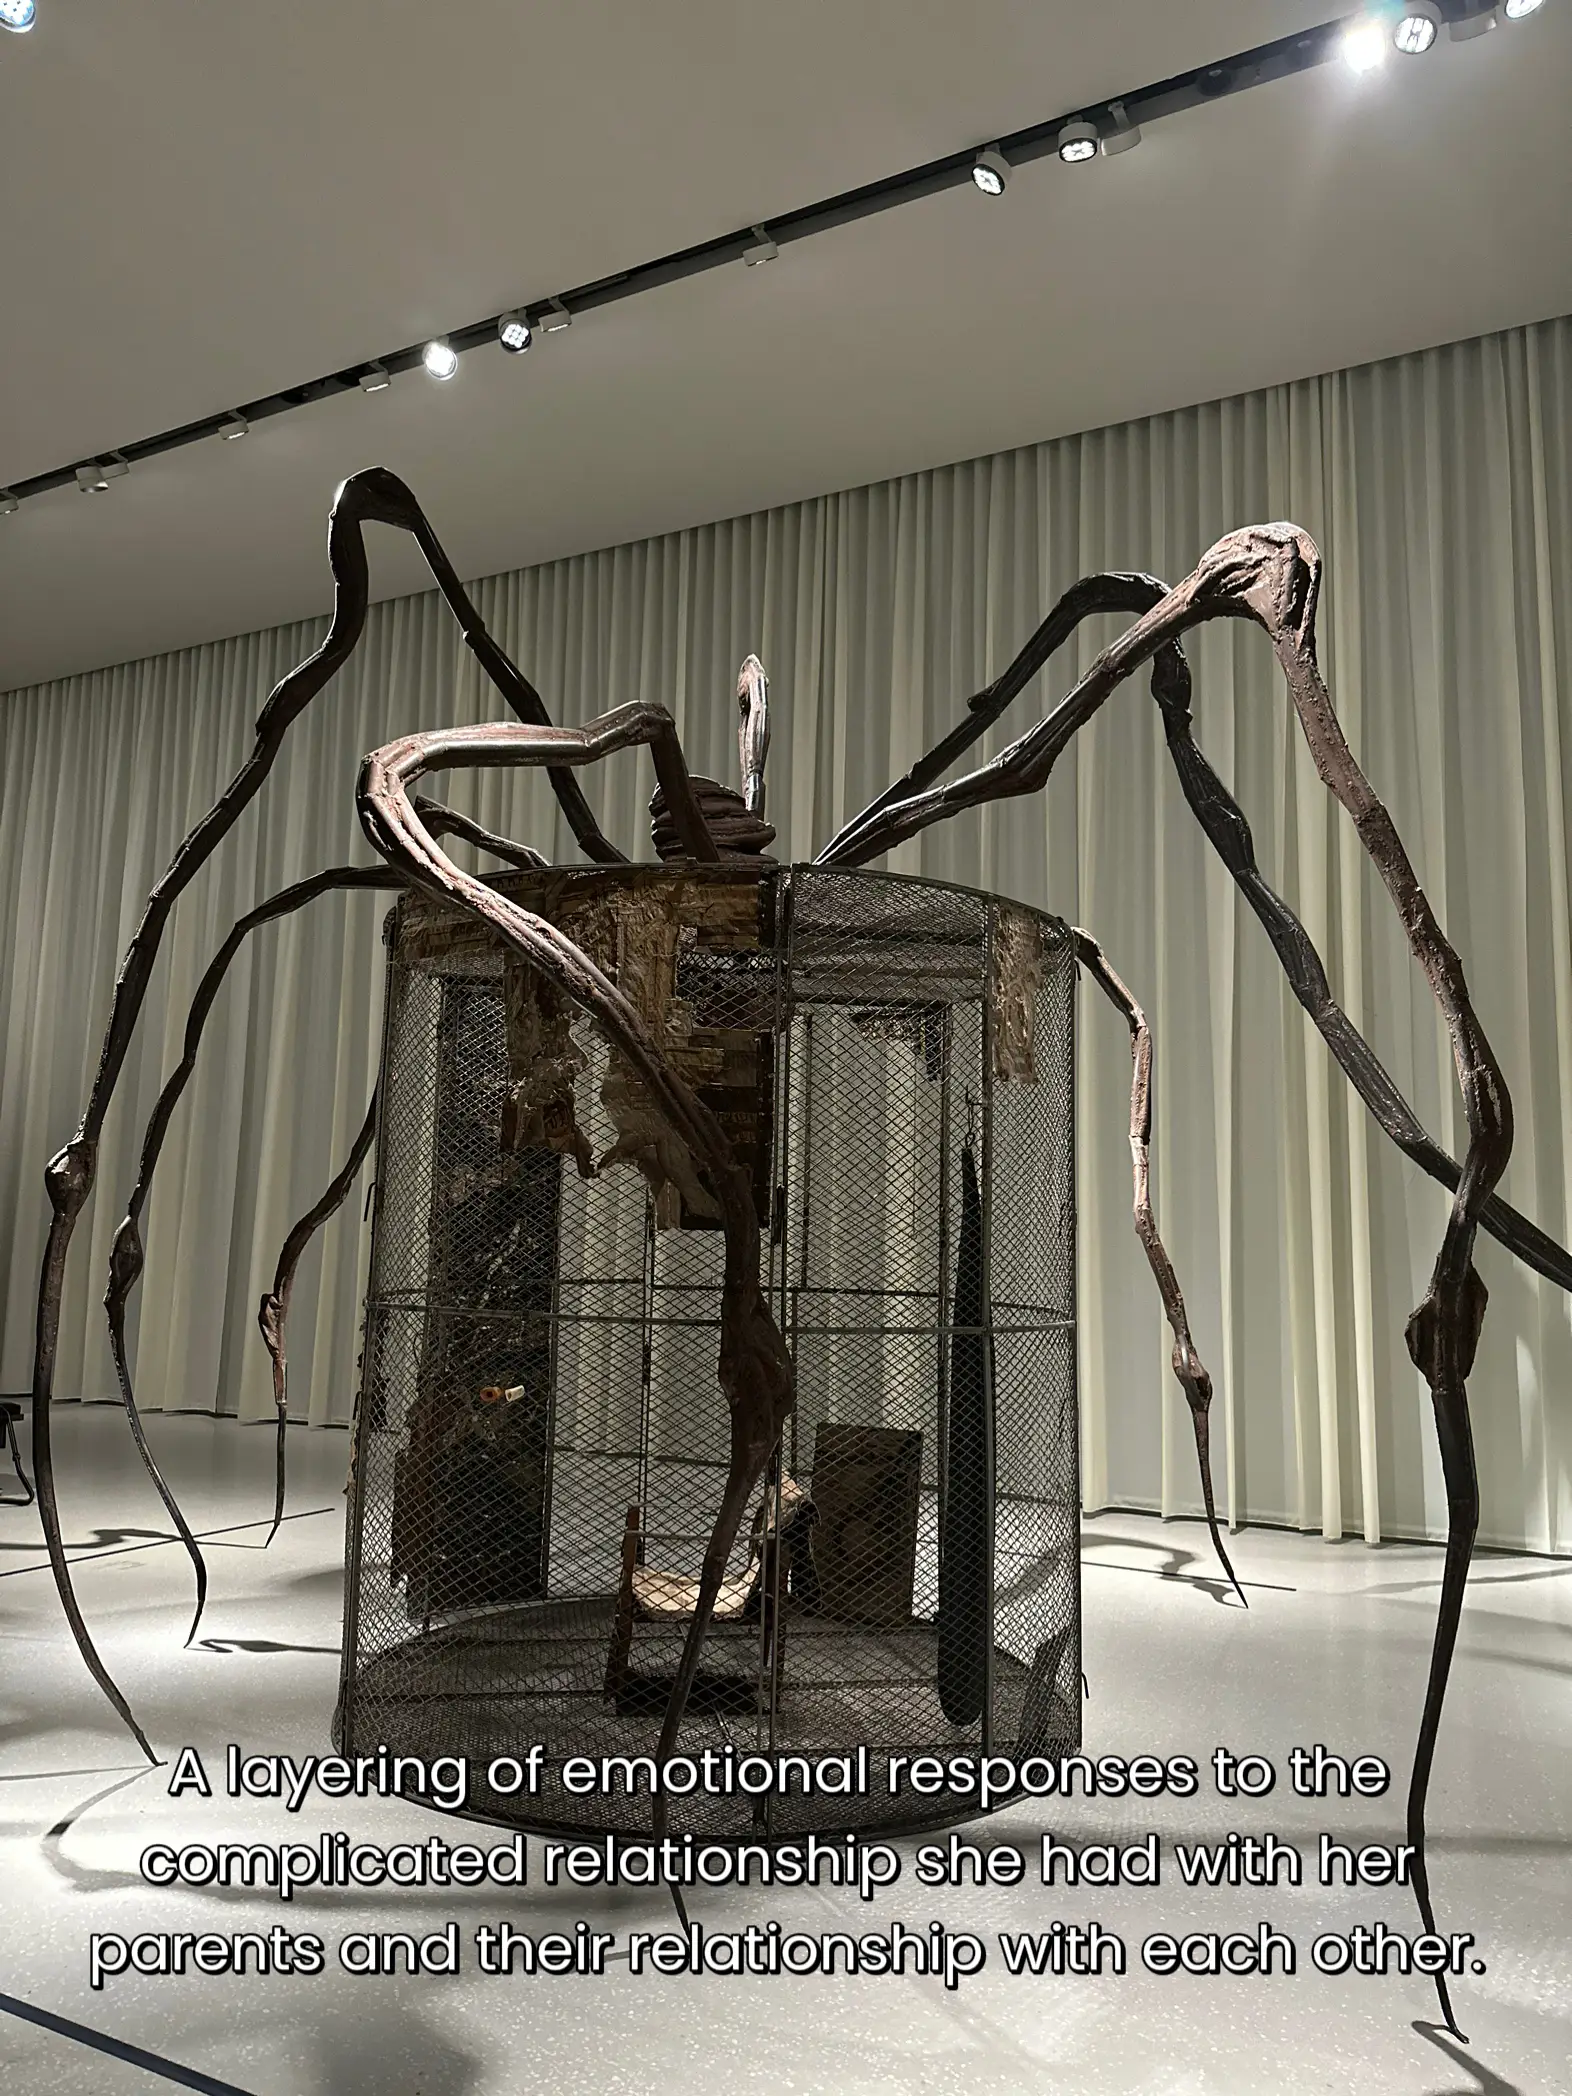 LOUISE BOURGEOIS. IMAGINARY CONVERSATIONS